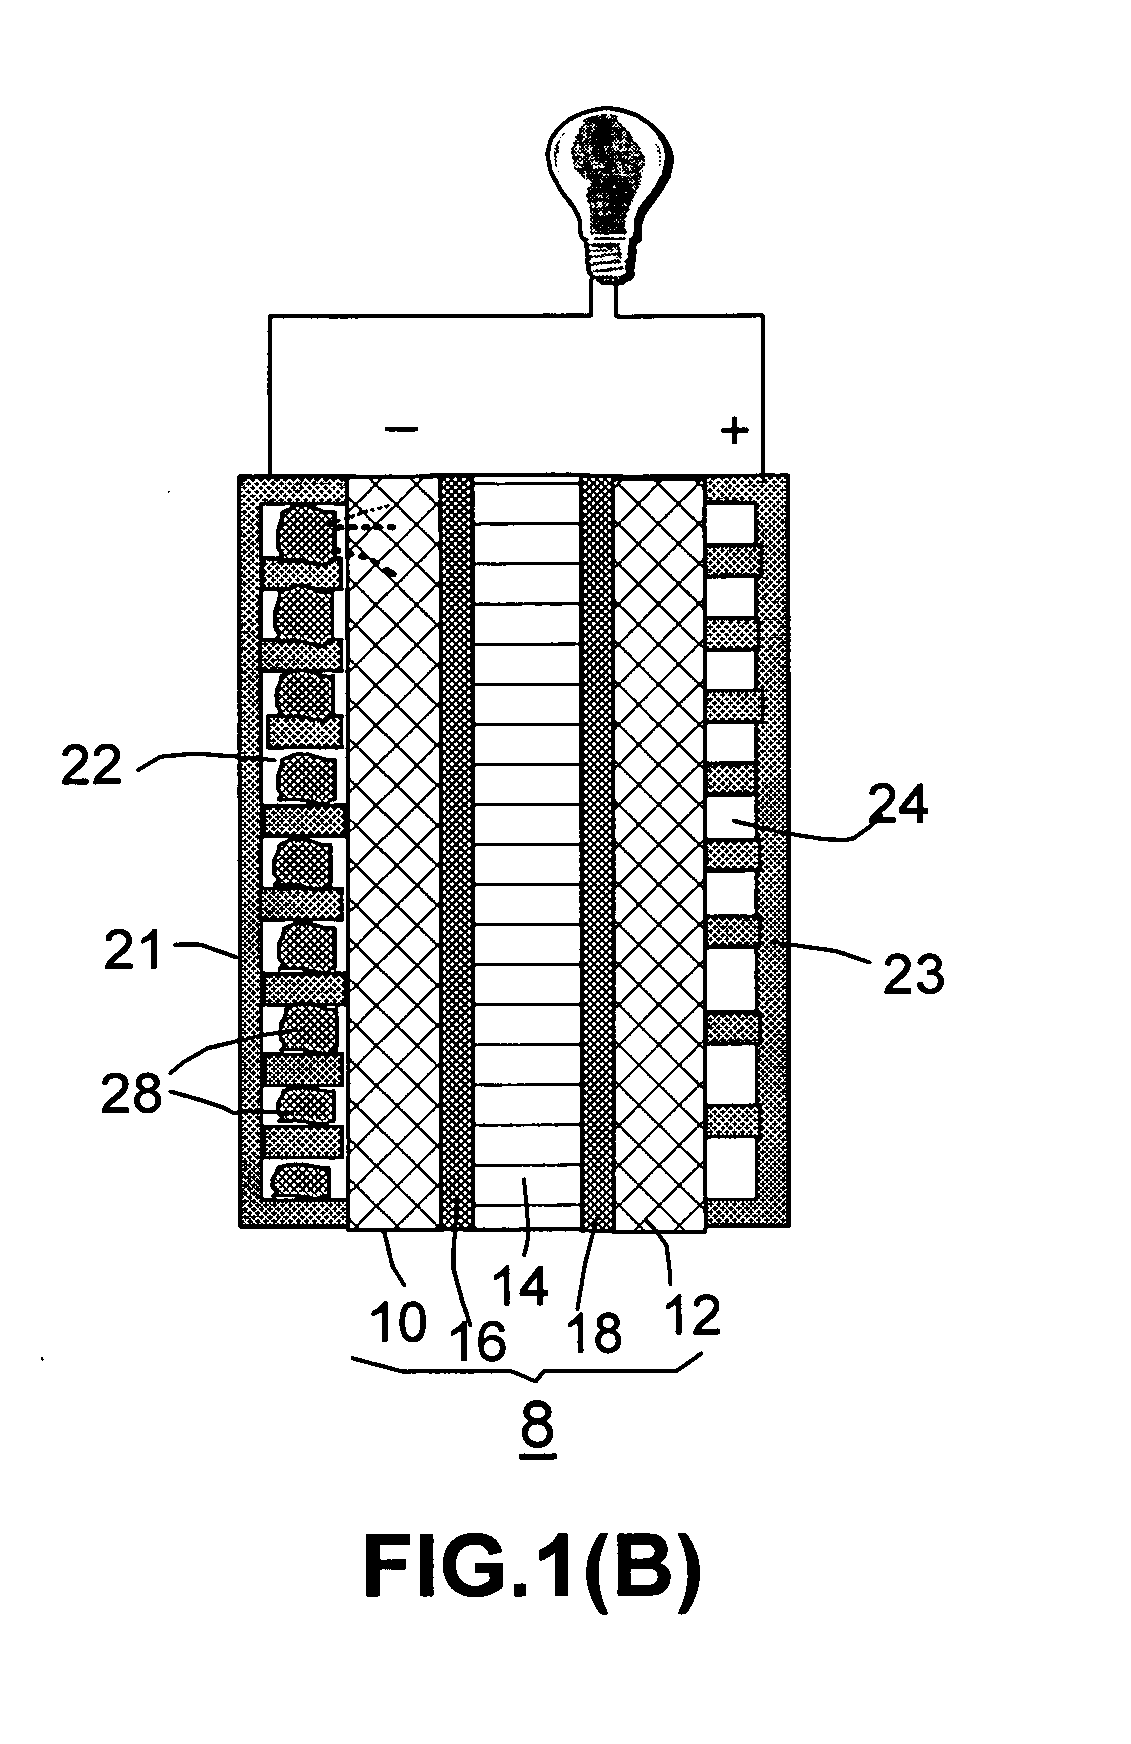 Controlled-release vapor fuel cell